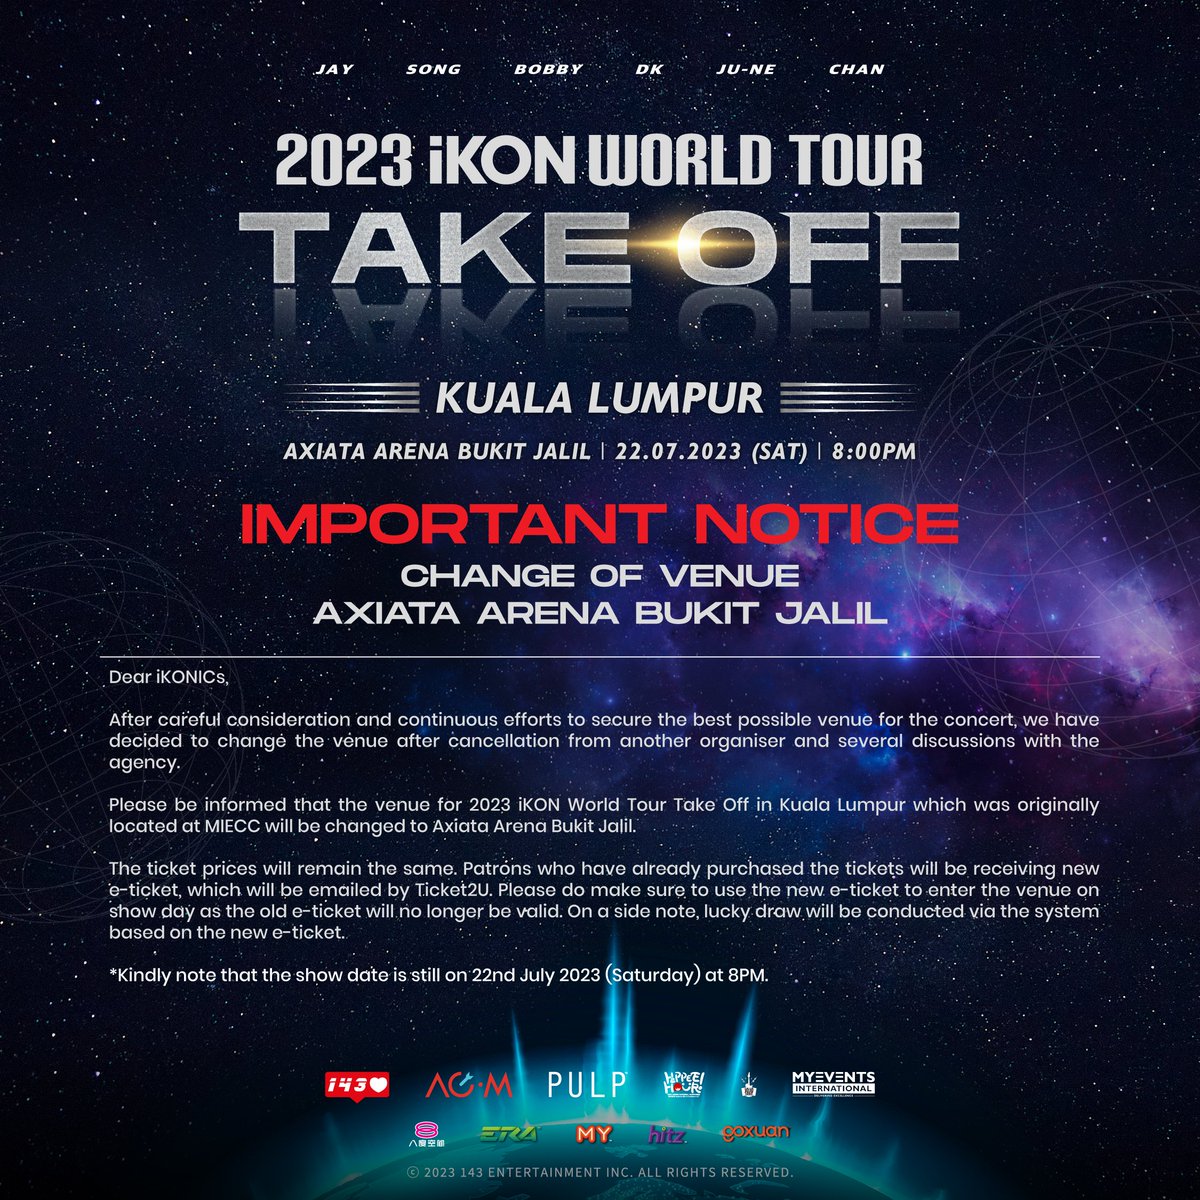 IMPORTANT NOTICE‼️ Please be informed that the venue for 2023 iKON WORLD TOUR TAKE OFF IN KUALA LUMPUR have changed to AXIATA ARENA, BUKIT JALIL.
#iKONinKL 

@pulpliveworld @MYiKONICS @goXUANmy